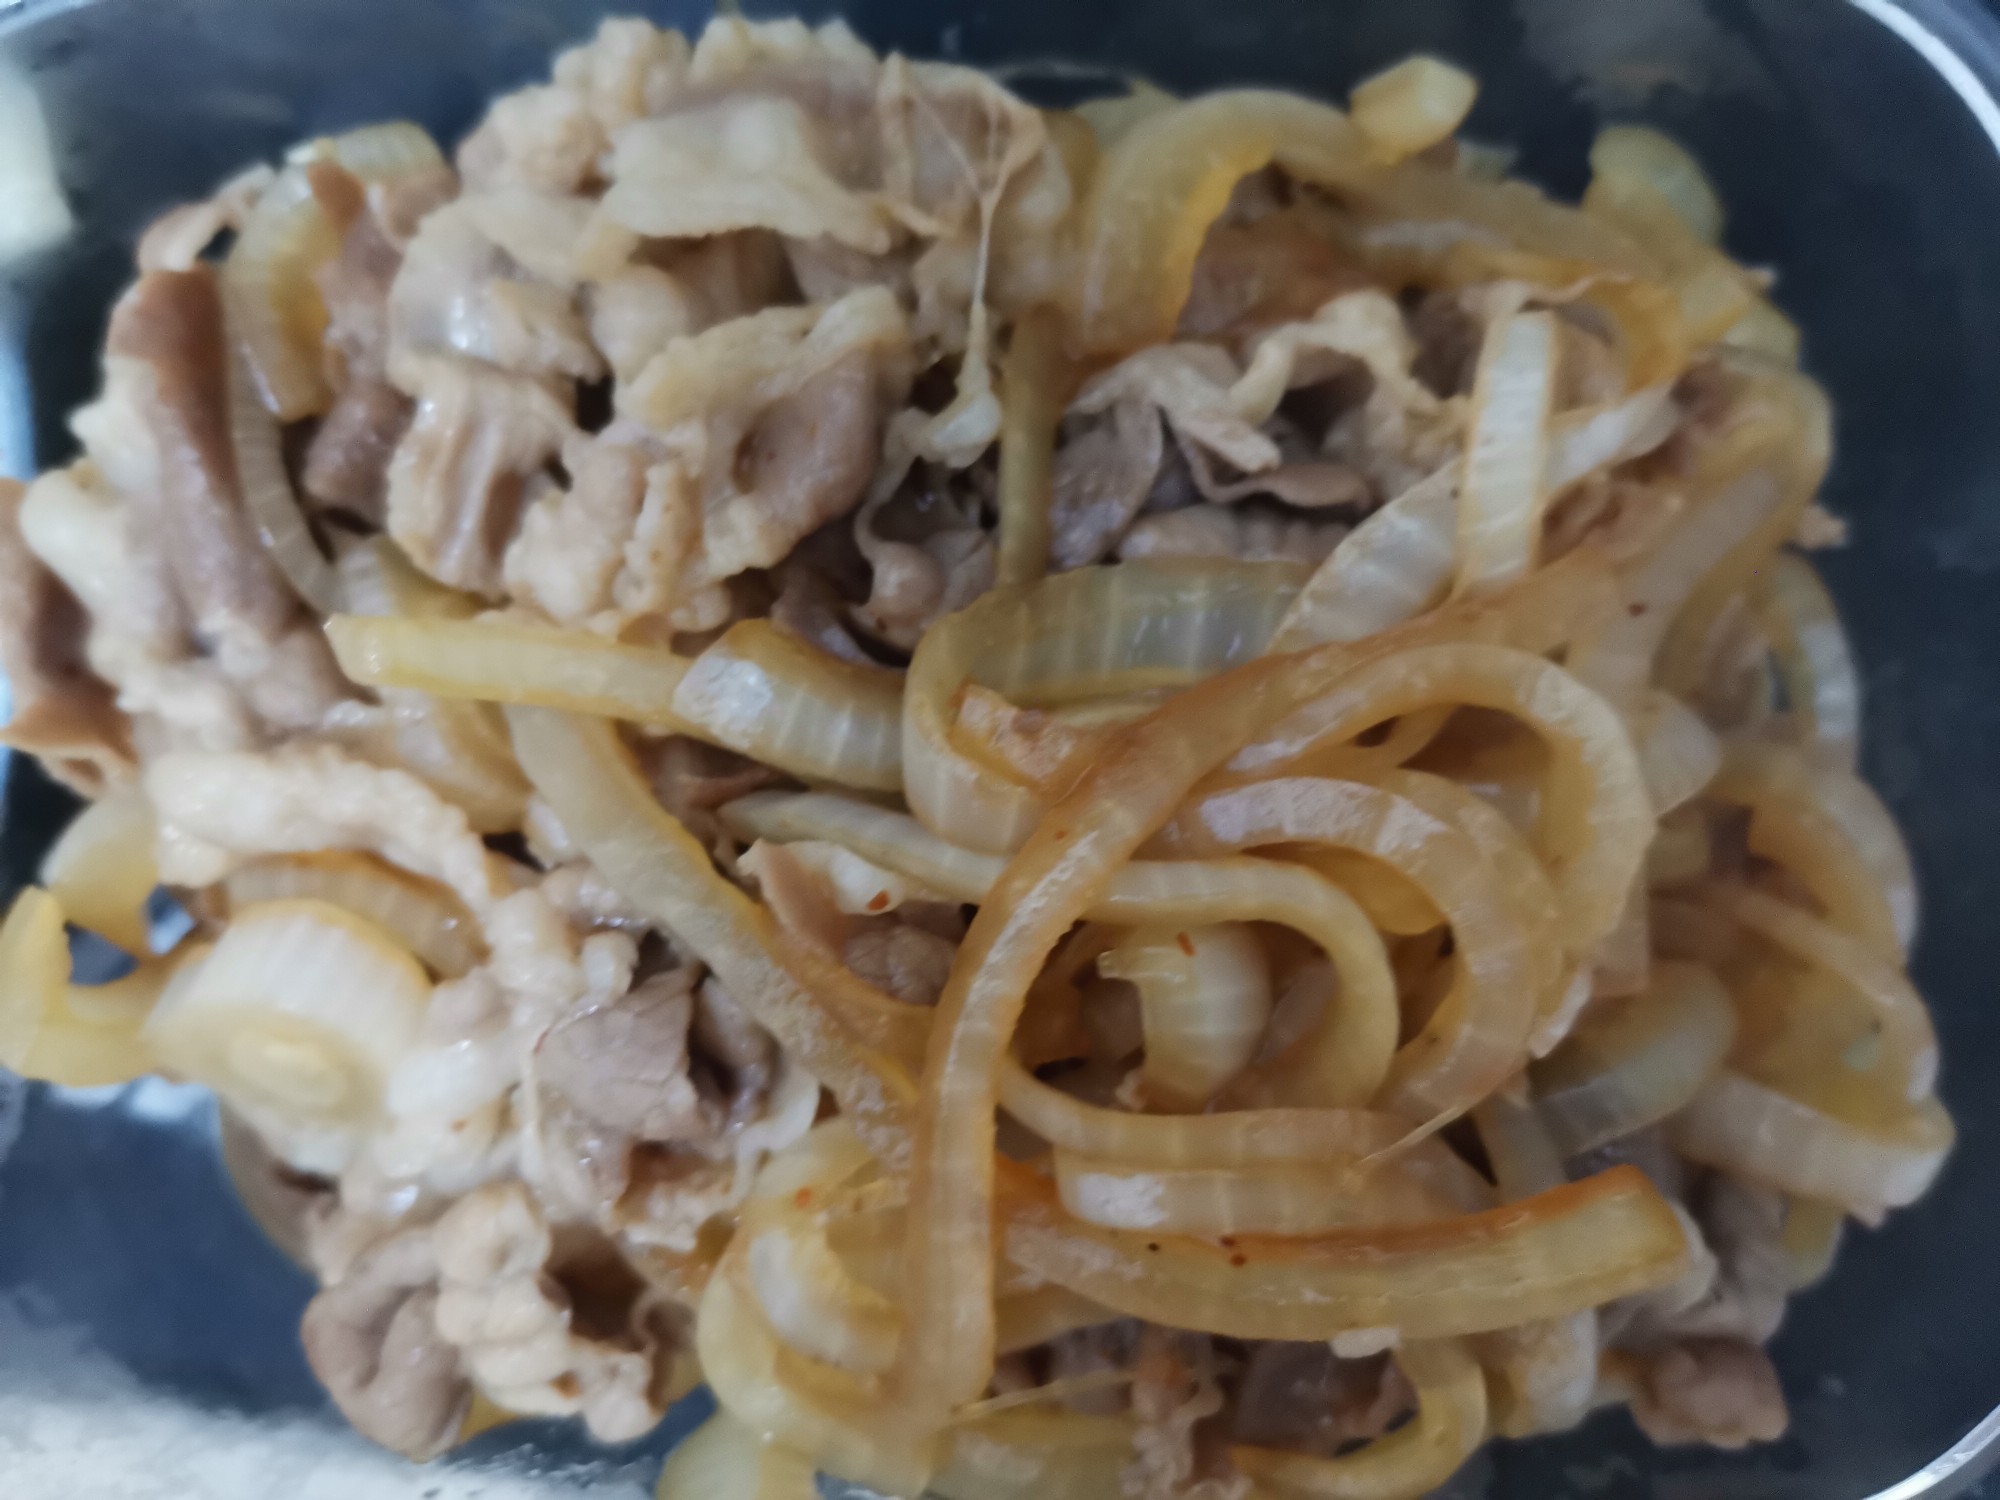 Fried Lamb with Onions recipe